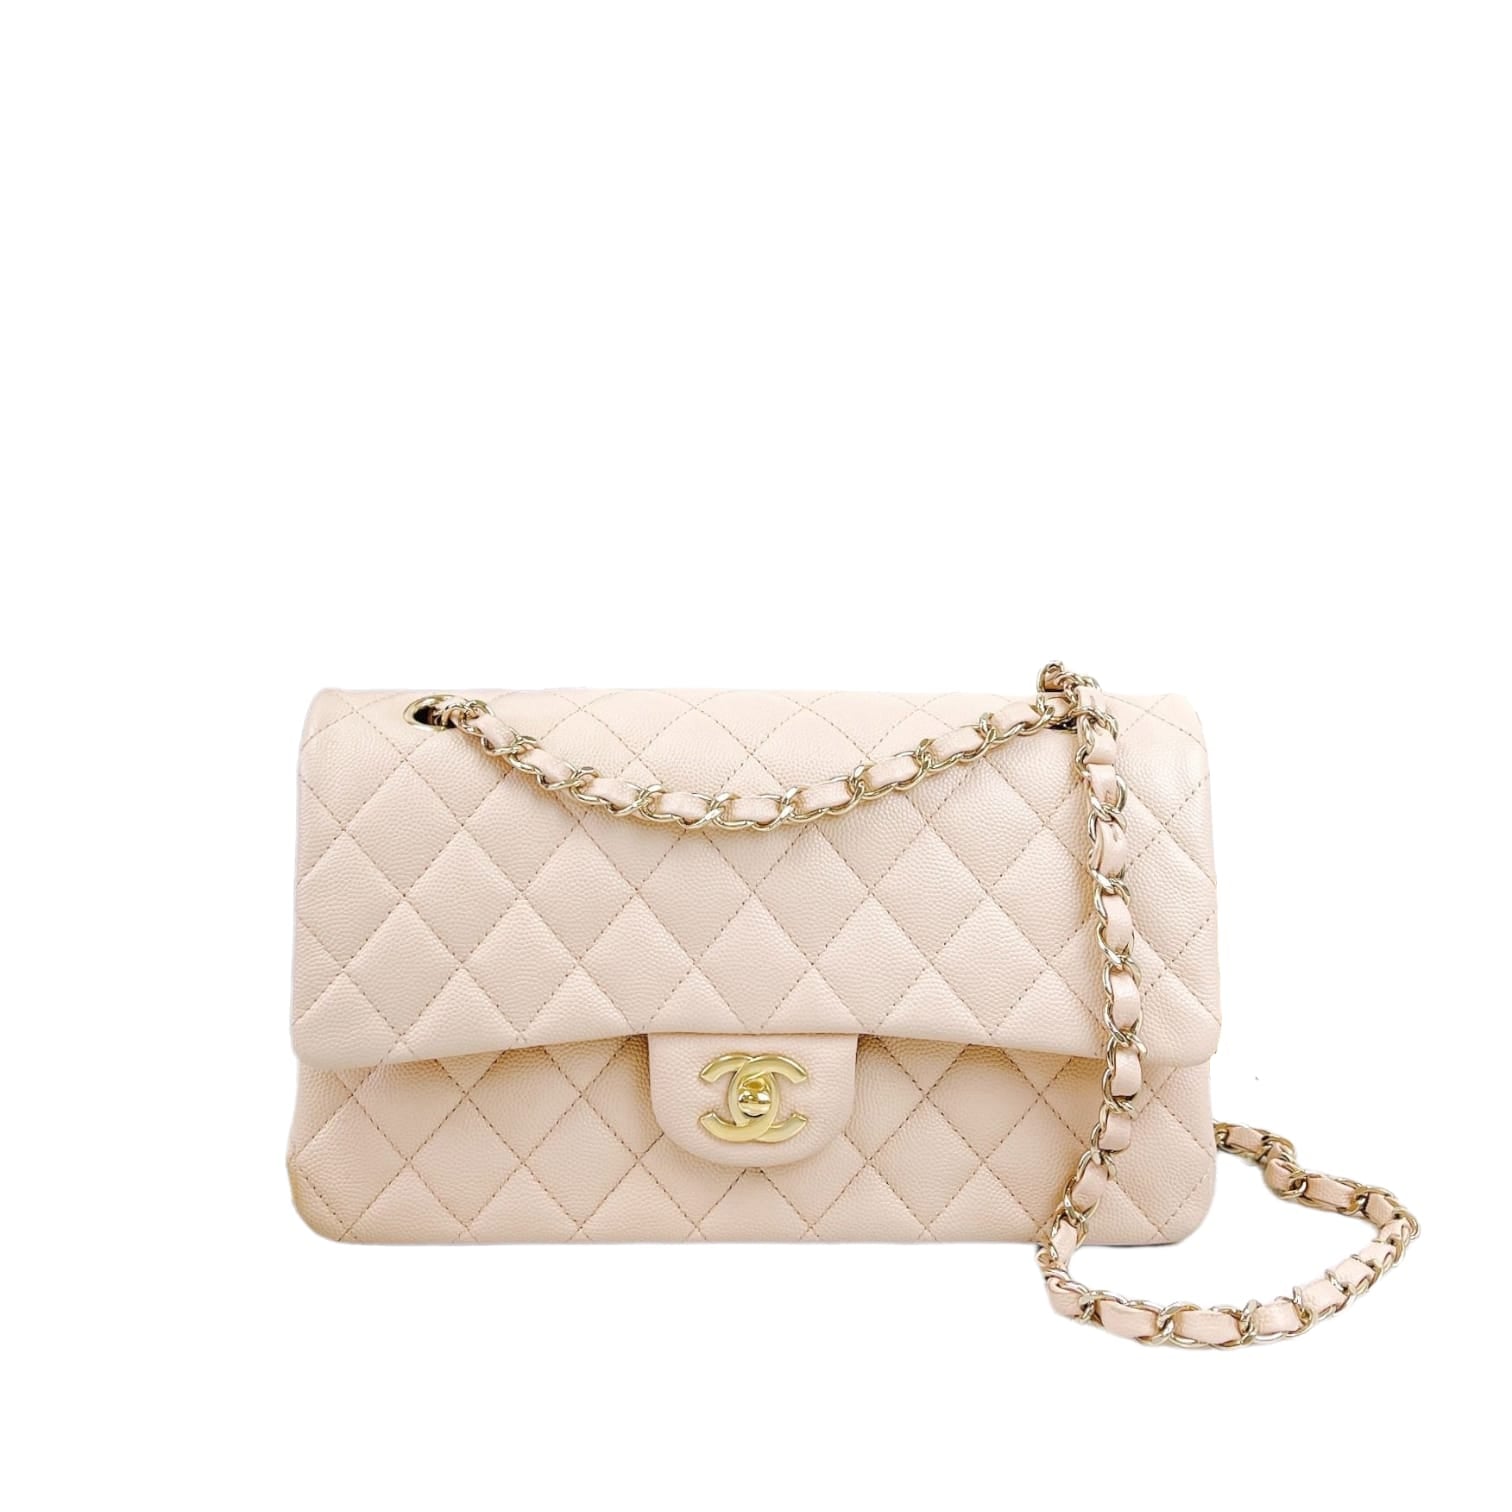 BNIB 💗 22S CHANEL Small Pink NH622 Classic Double Flap 💗Caviar